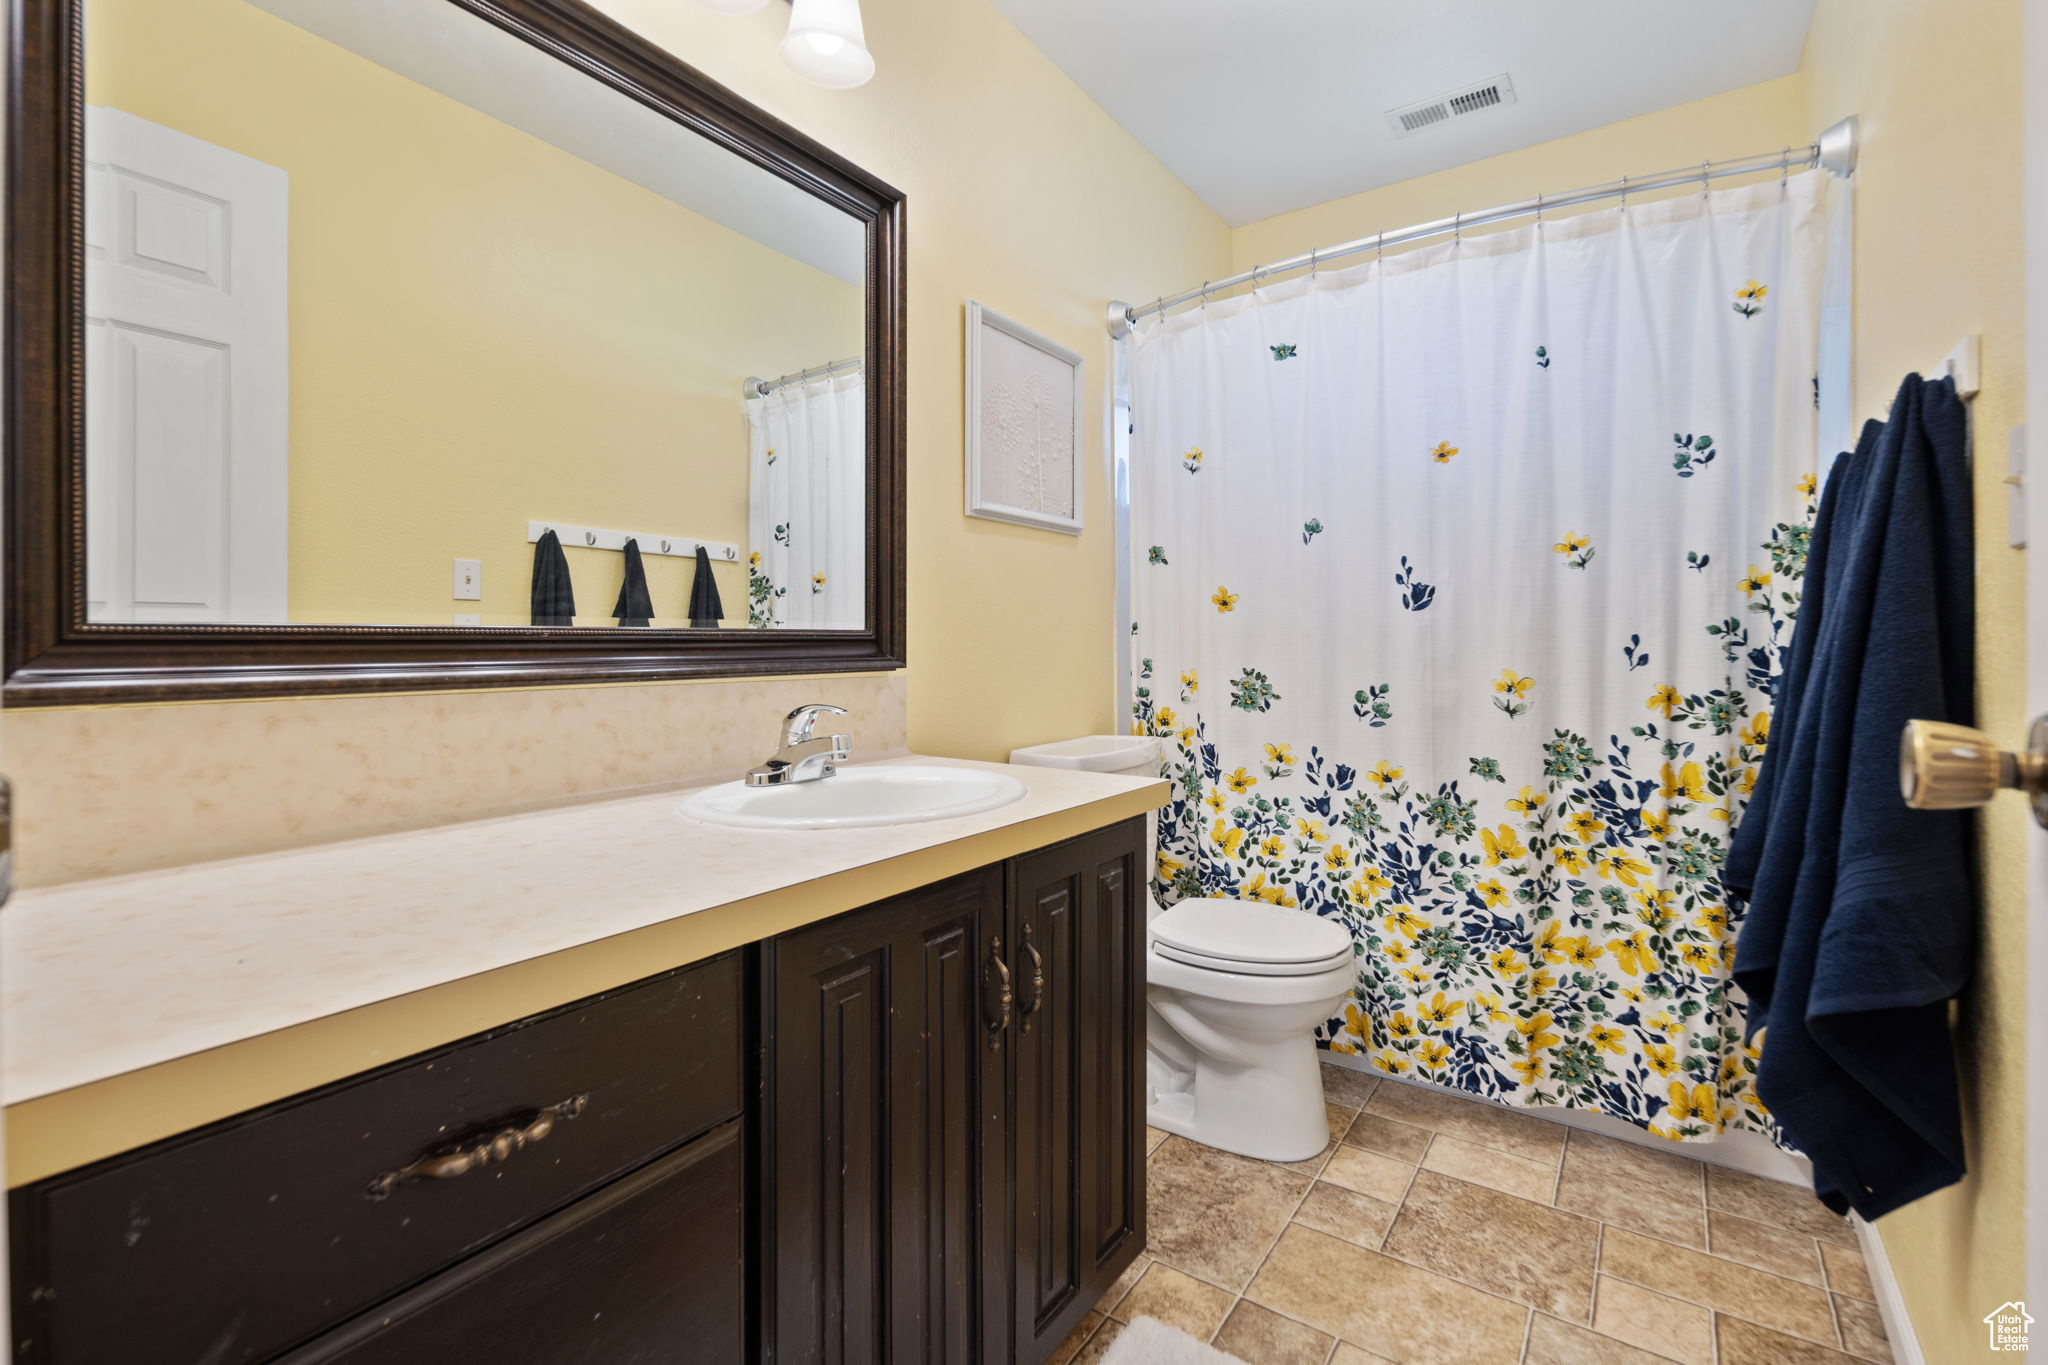 Full bathroom with large countertop